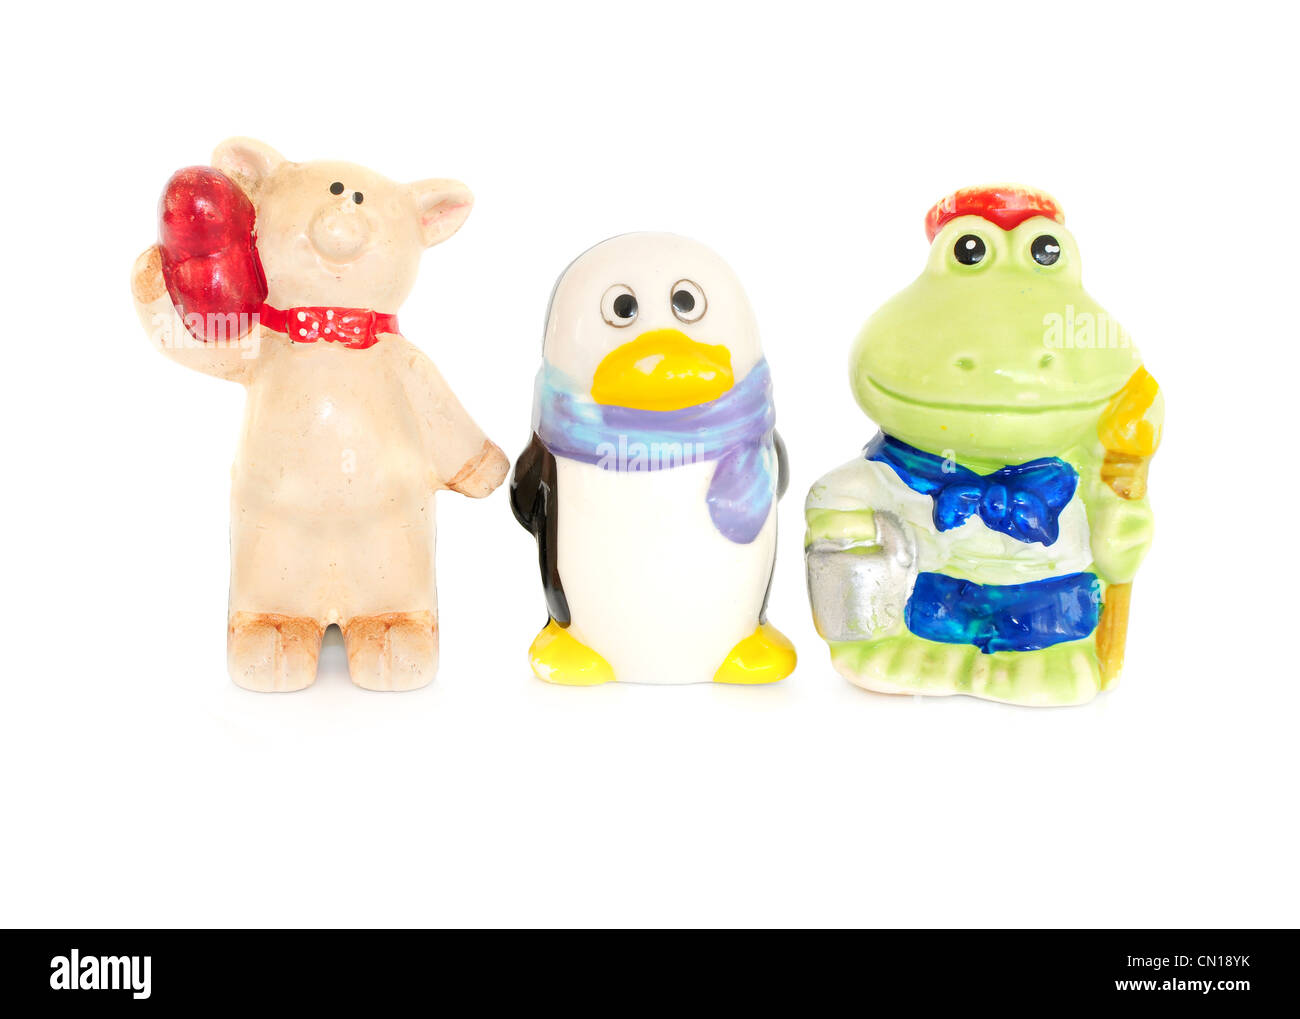 Three porcelain animals - pig, penguin and frog Stock Photo